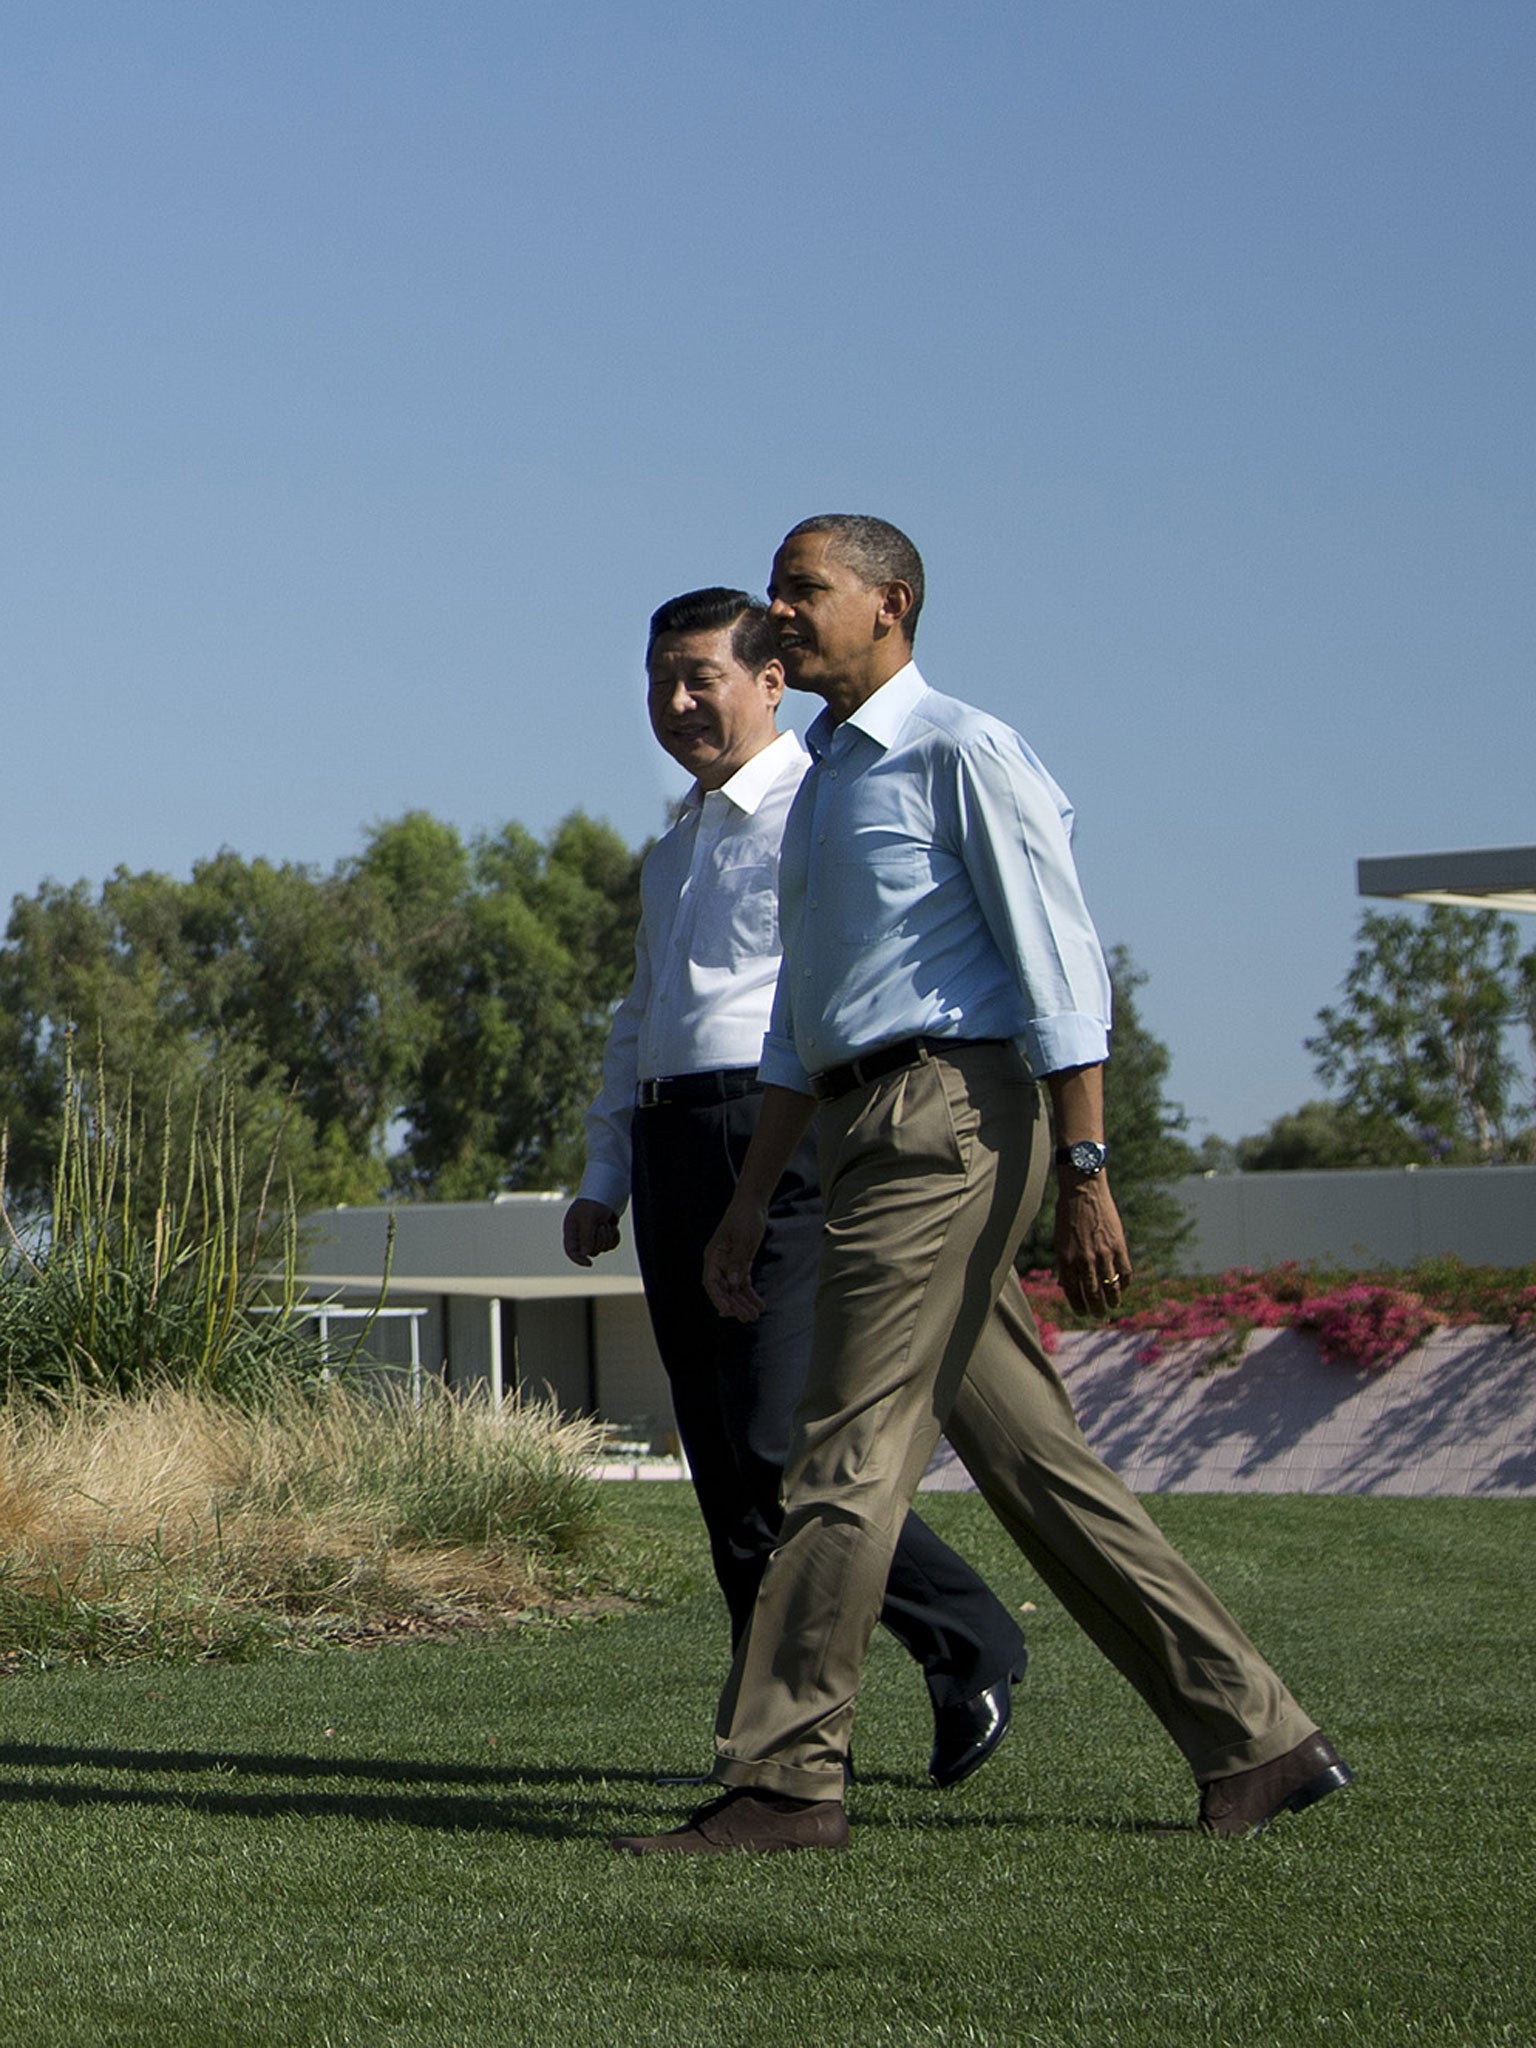 The Chinese President Xi Jinping, left, with President Obama, right